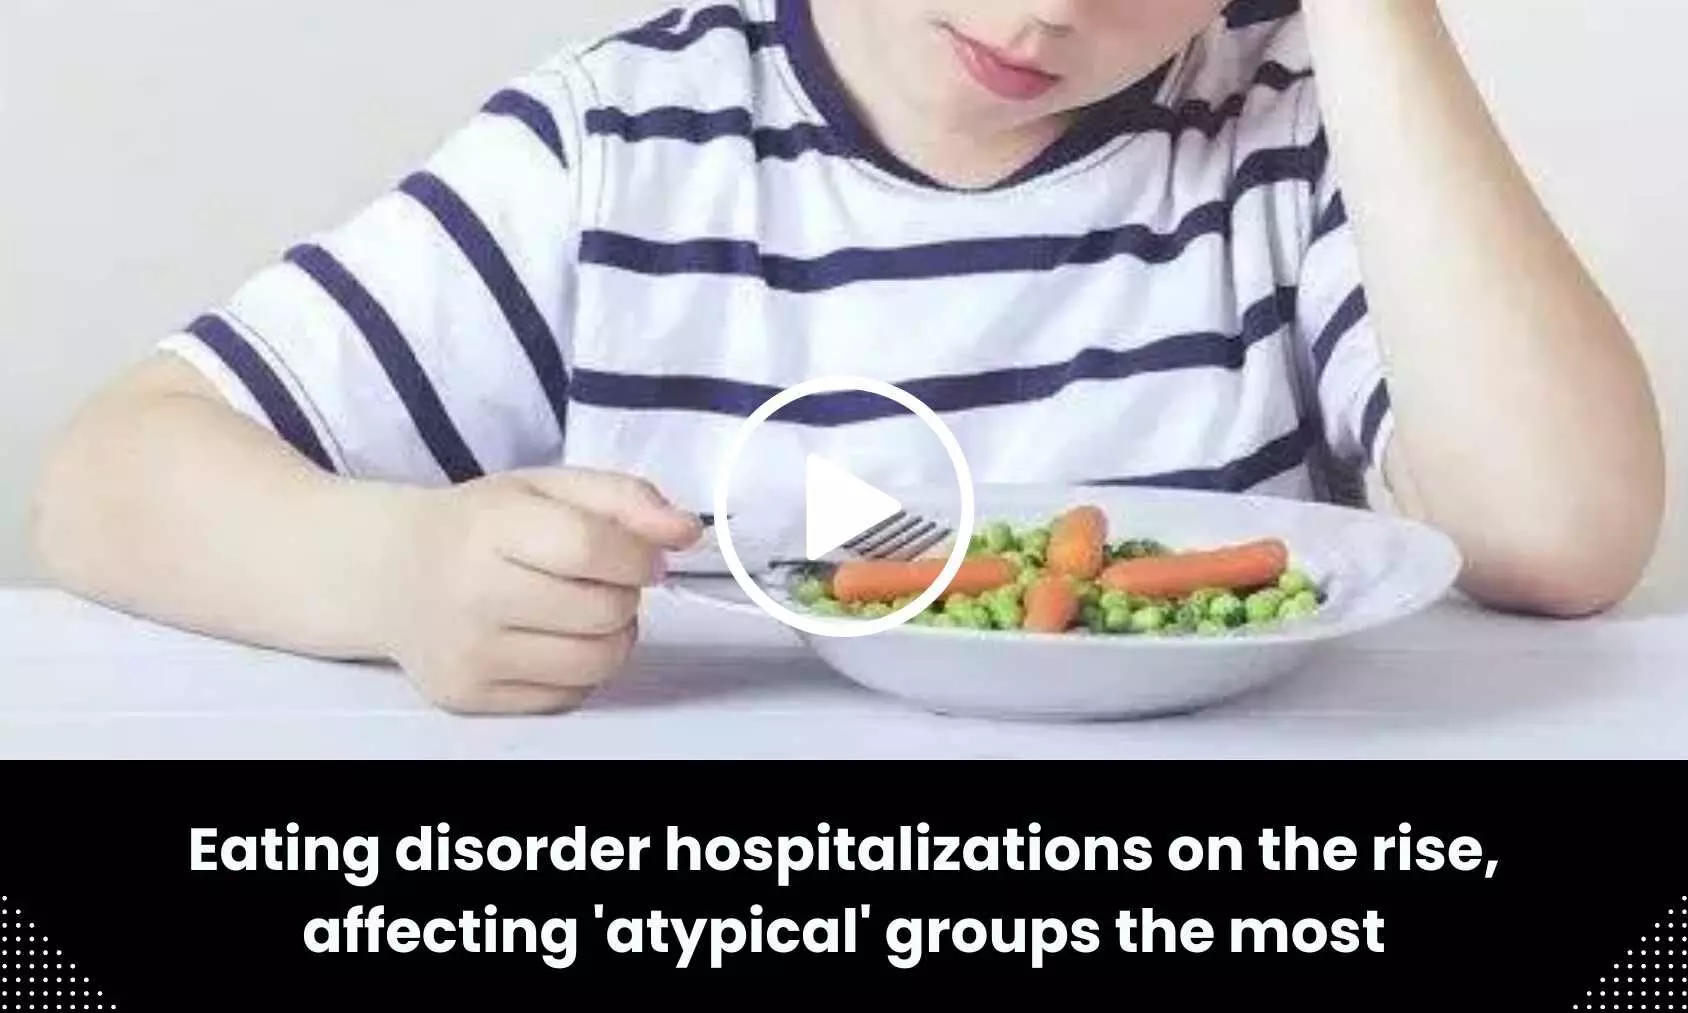 Eating disorder hospitalizations on the rise, affecting atypical groups the most